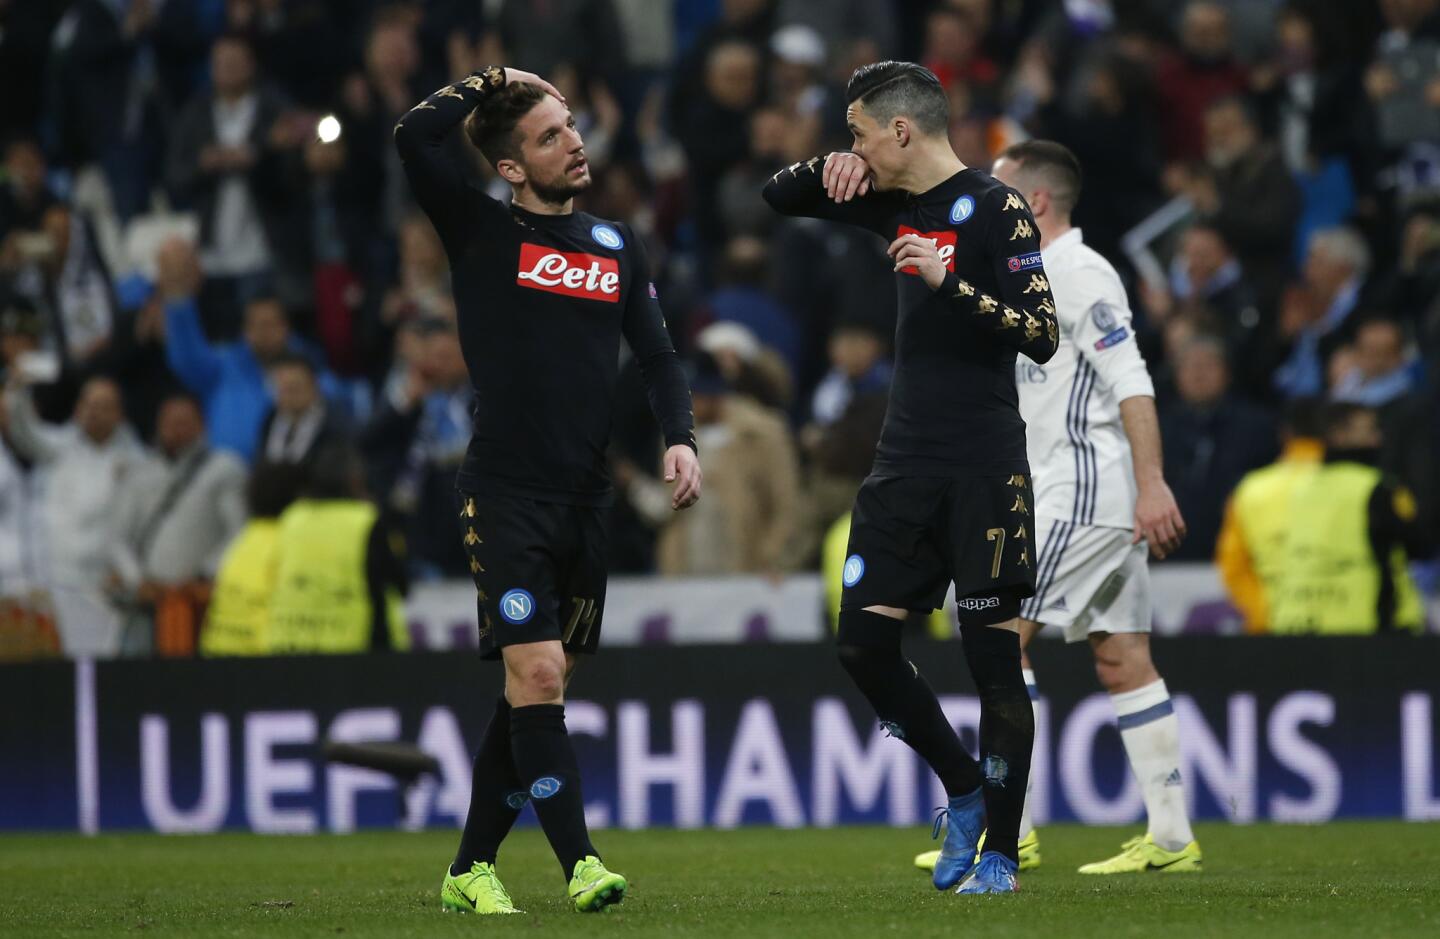 Napoli's Dries Mertens and Jose Callejon after the match